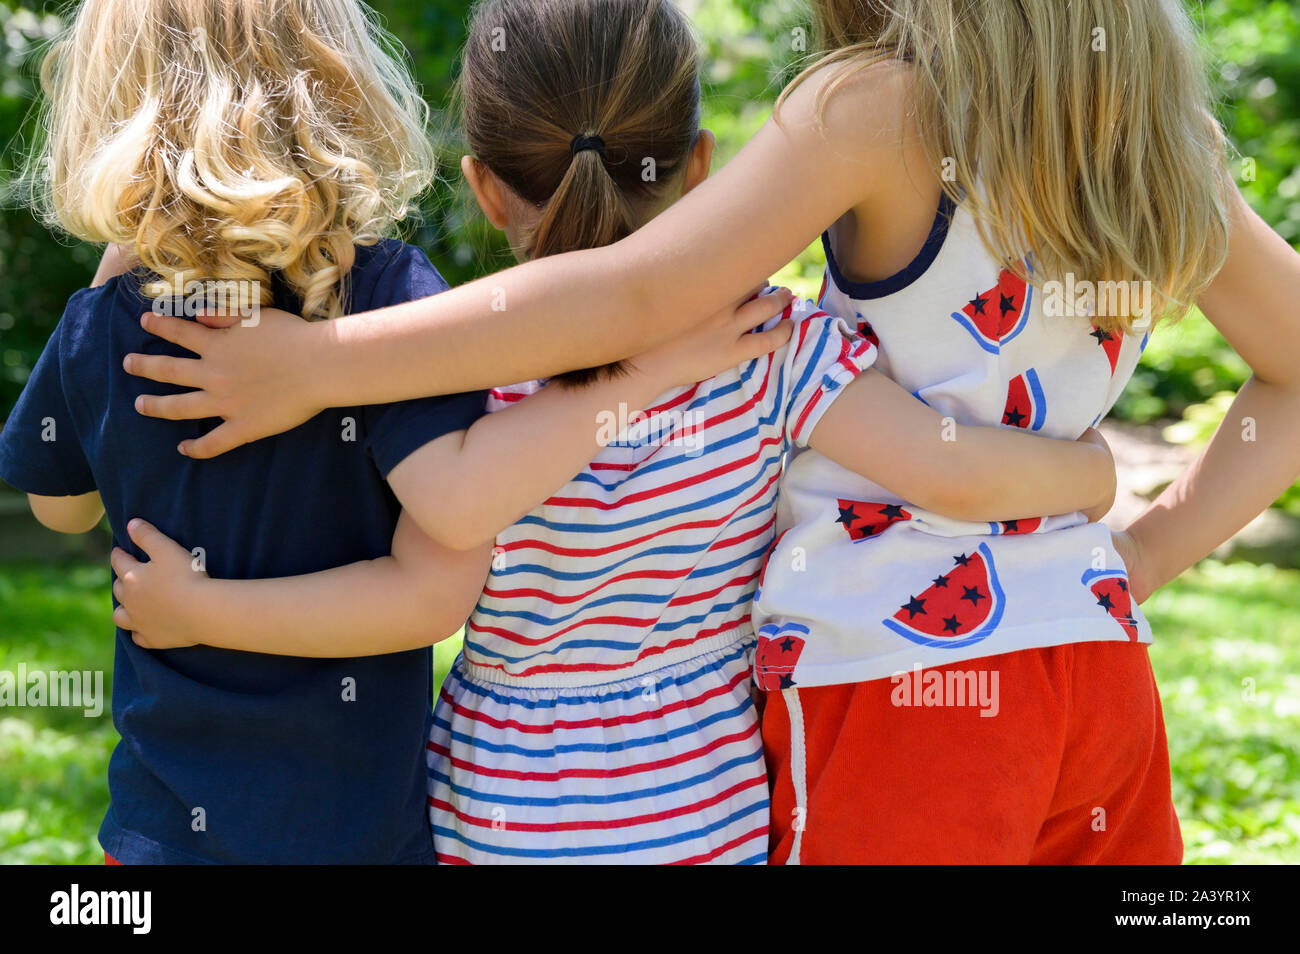 Rear view of children with their arms around each other Stock Photo